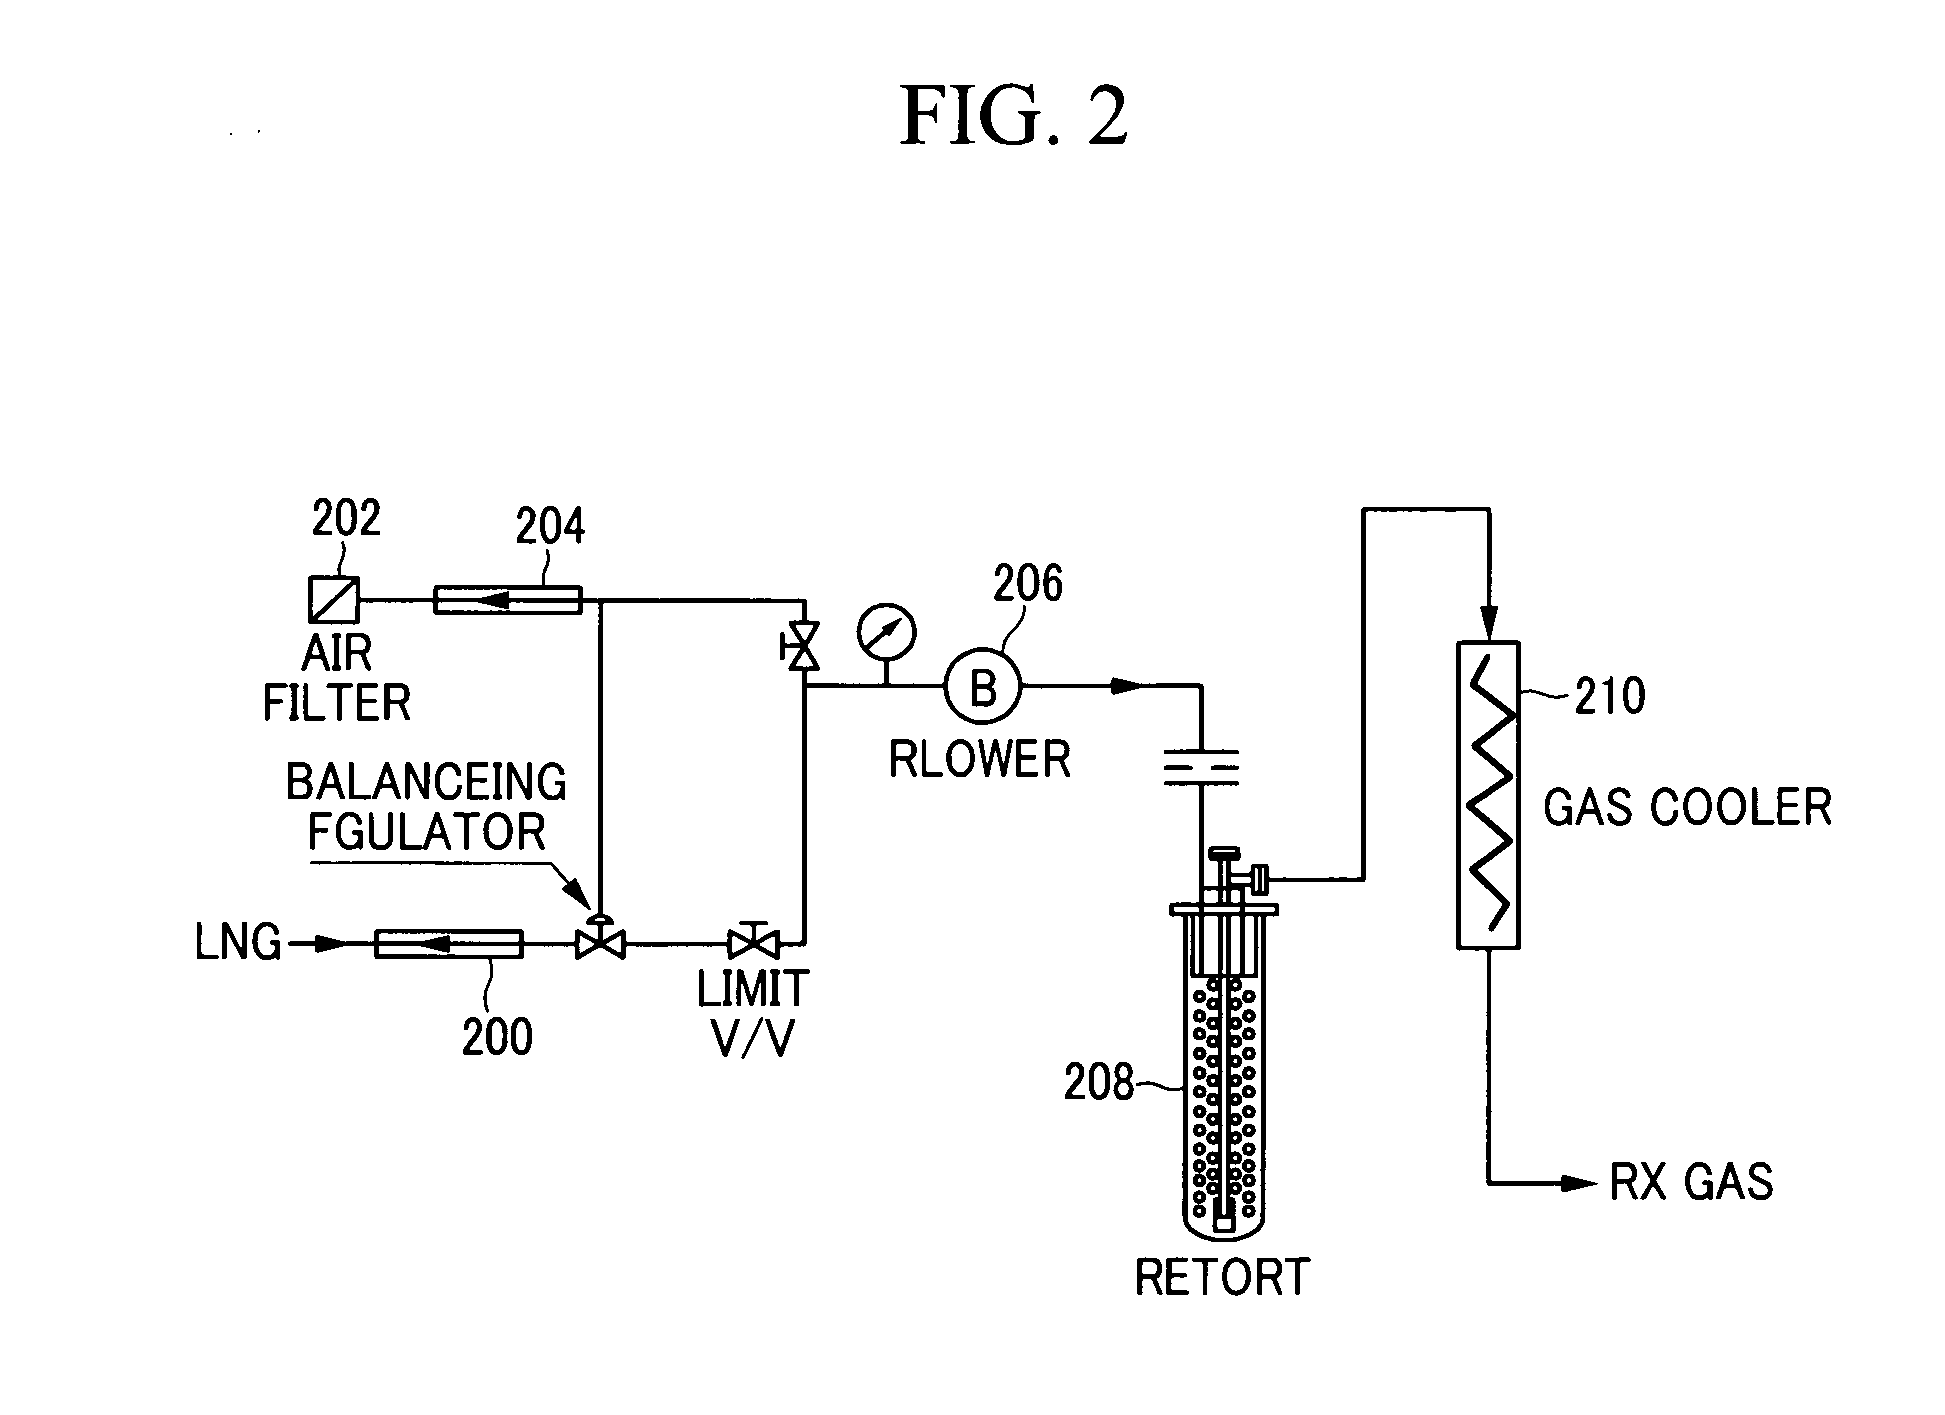 System for controlling atmosphere gas inside furnace